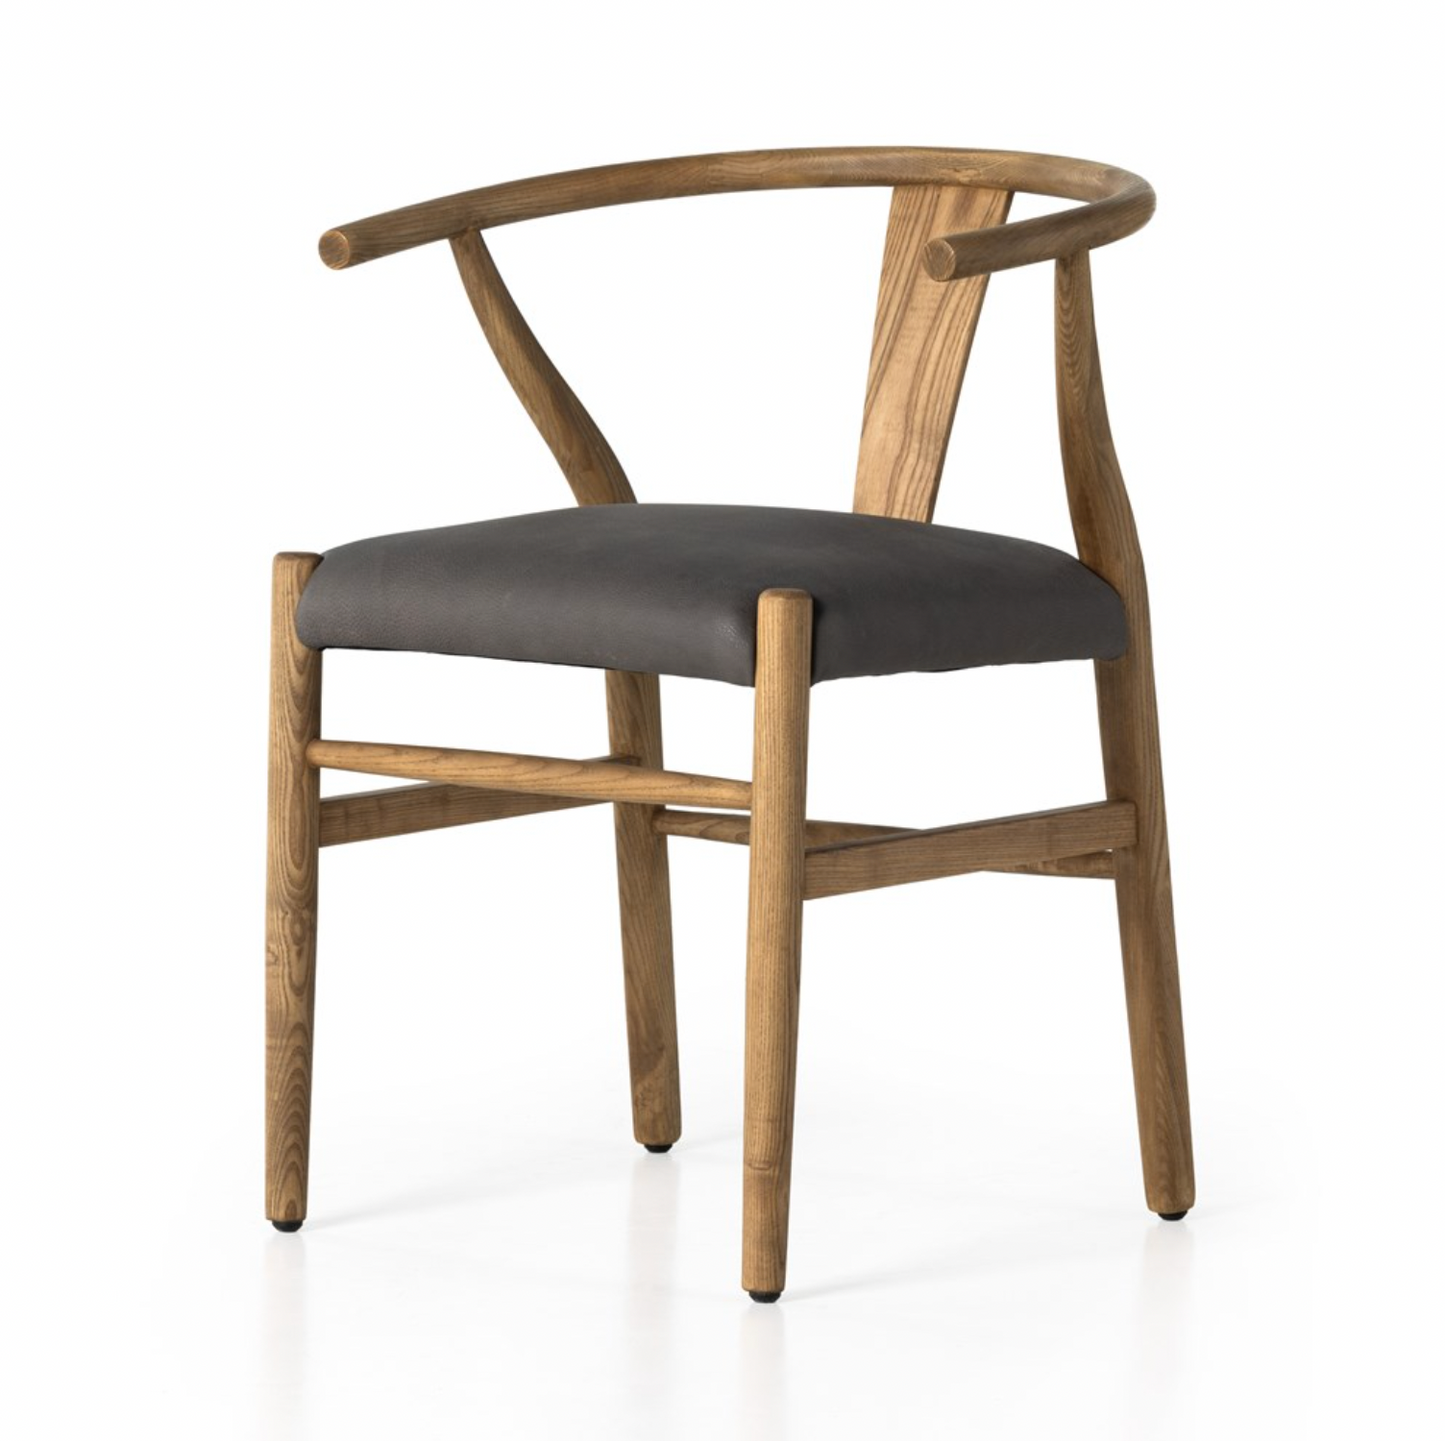 Stowe Dining Chair - Heritage Graphite